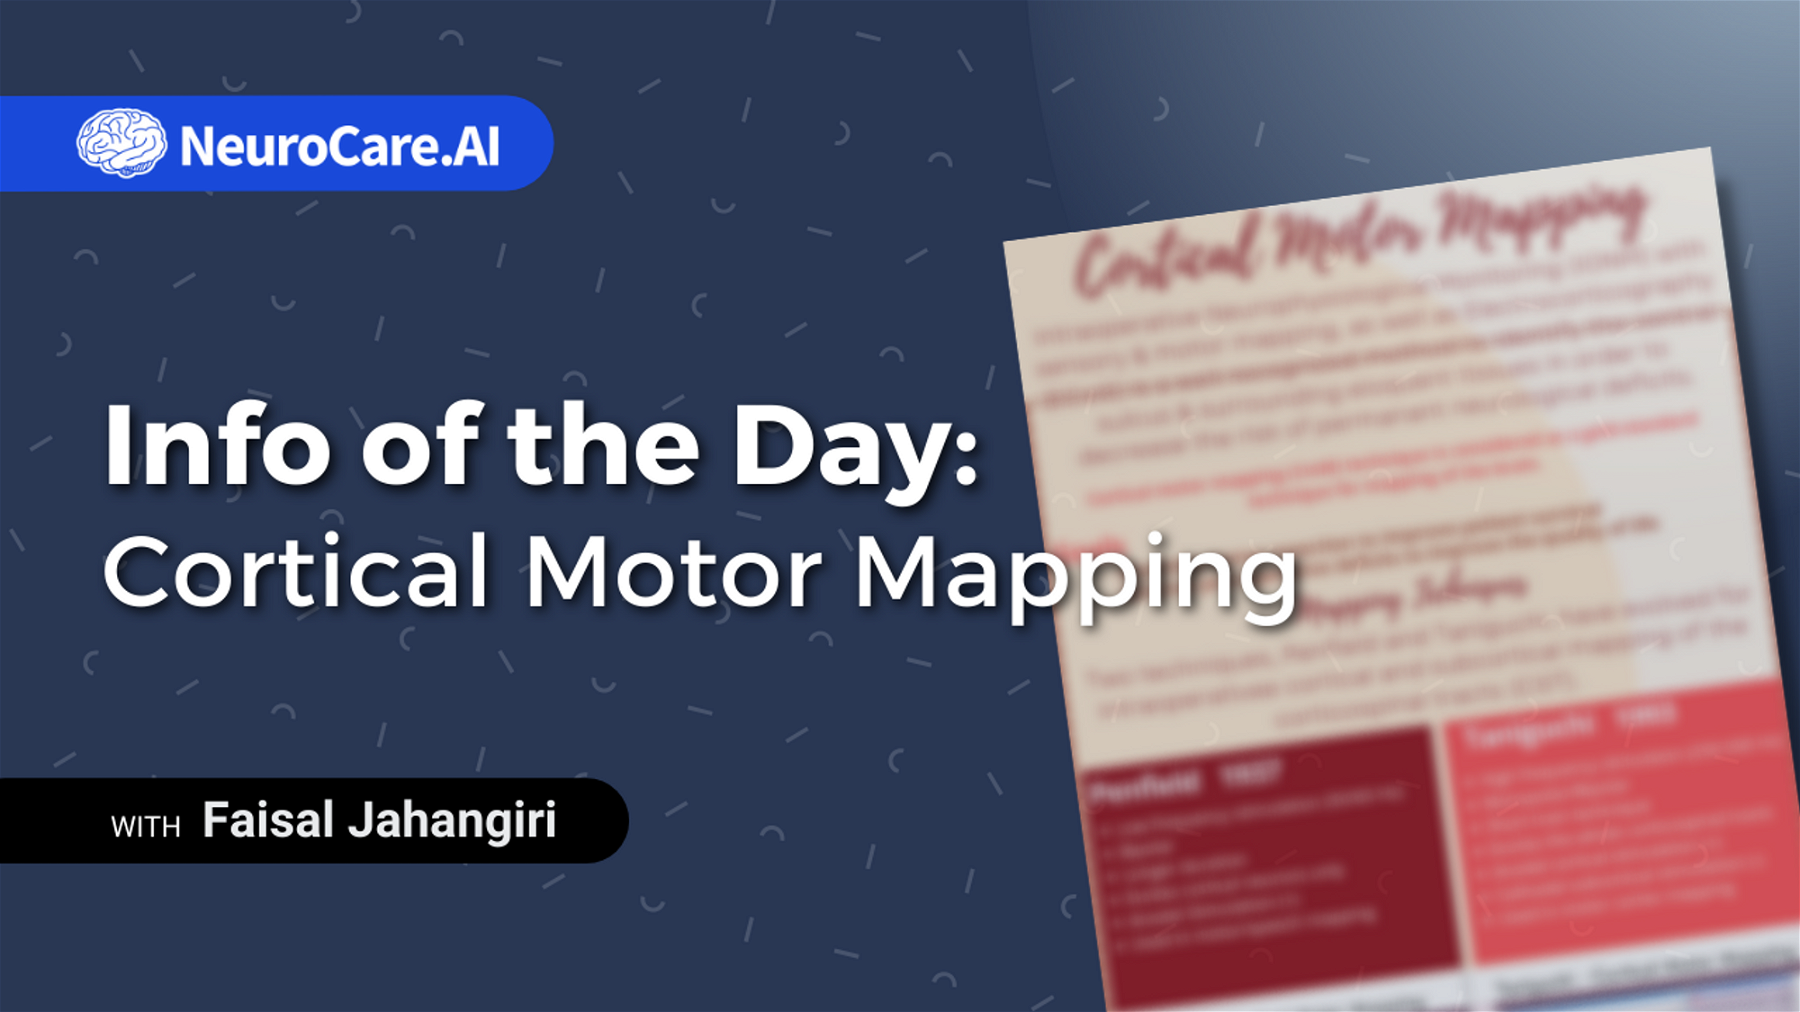 Info of the Day: "Cortical Motor Mapping"